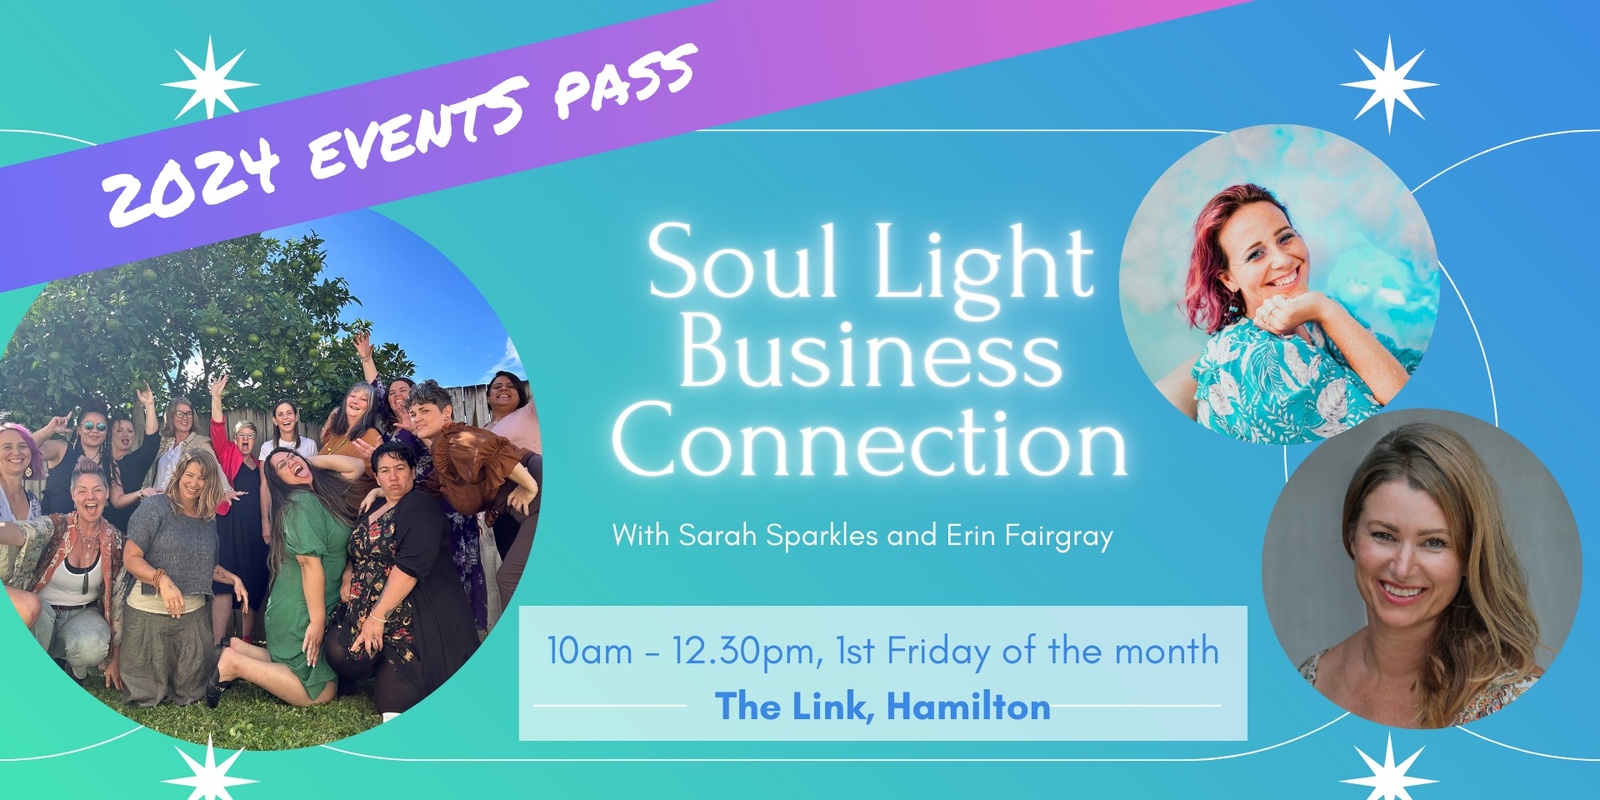 Banner image for 2024 EVENTS PASS - Soul Light Business Connection 